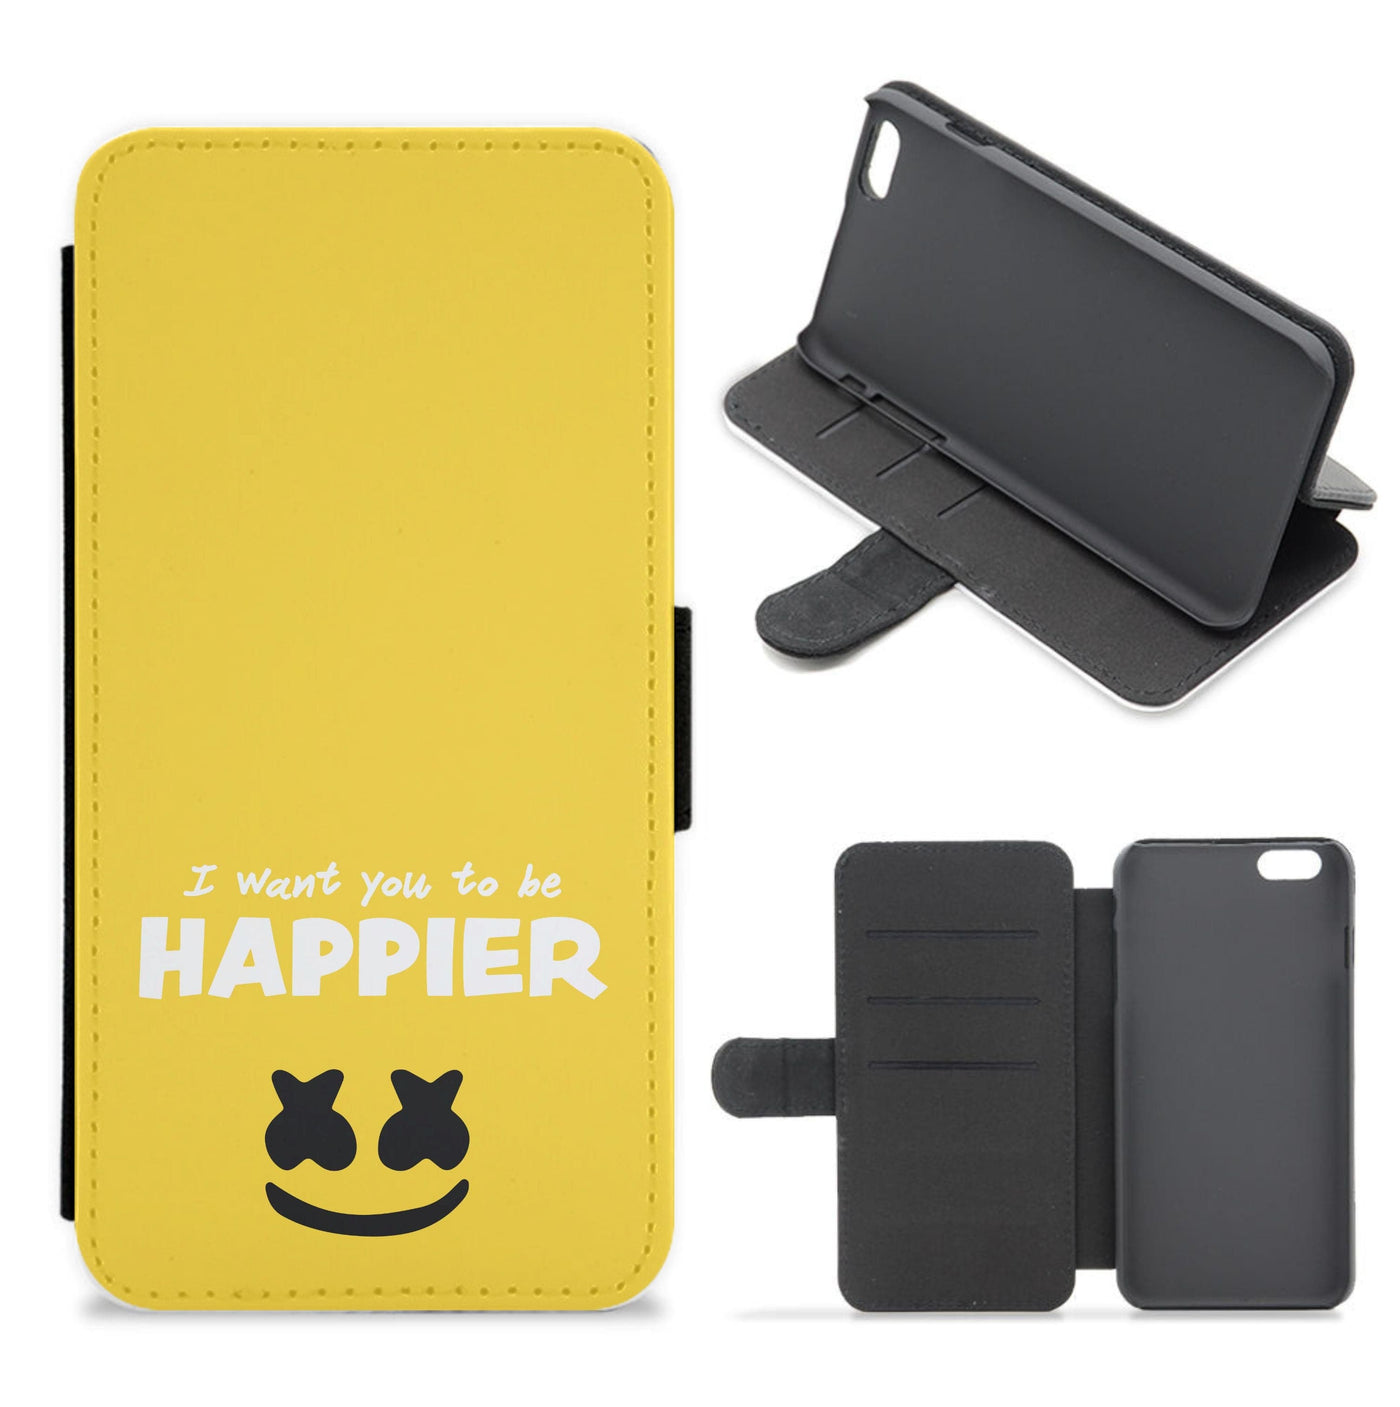 I Want You To Be Happier - Marshmello Flip / Wallet Phone Case